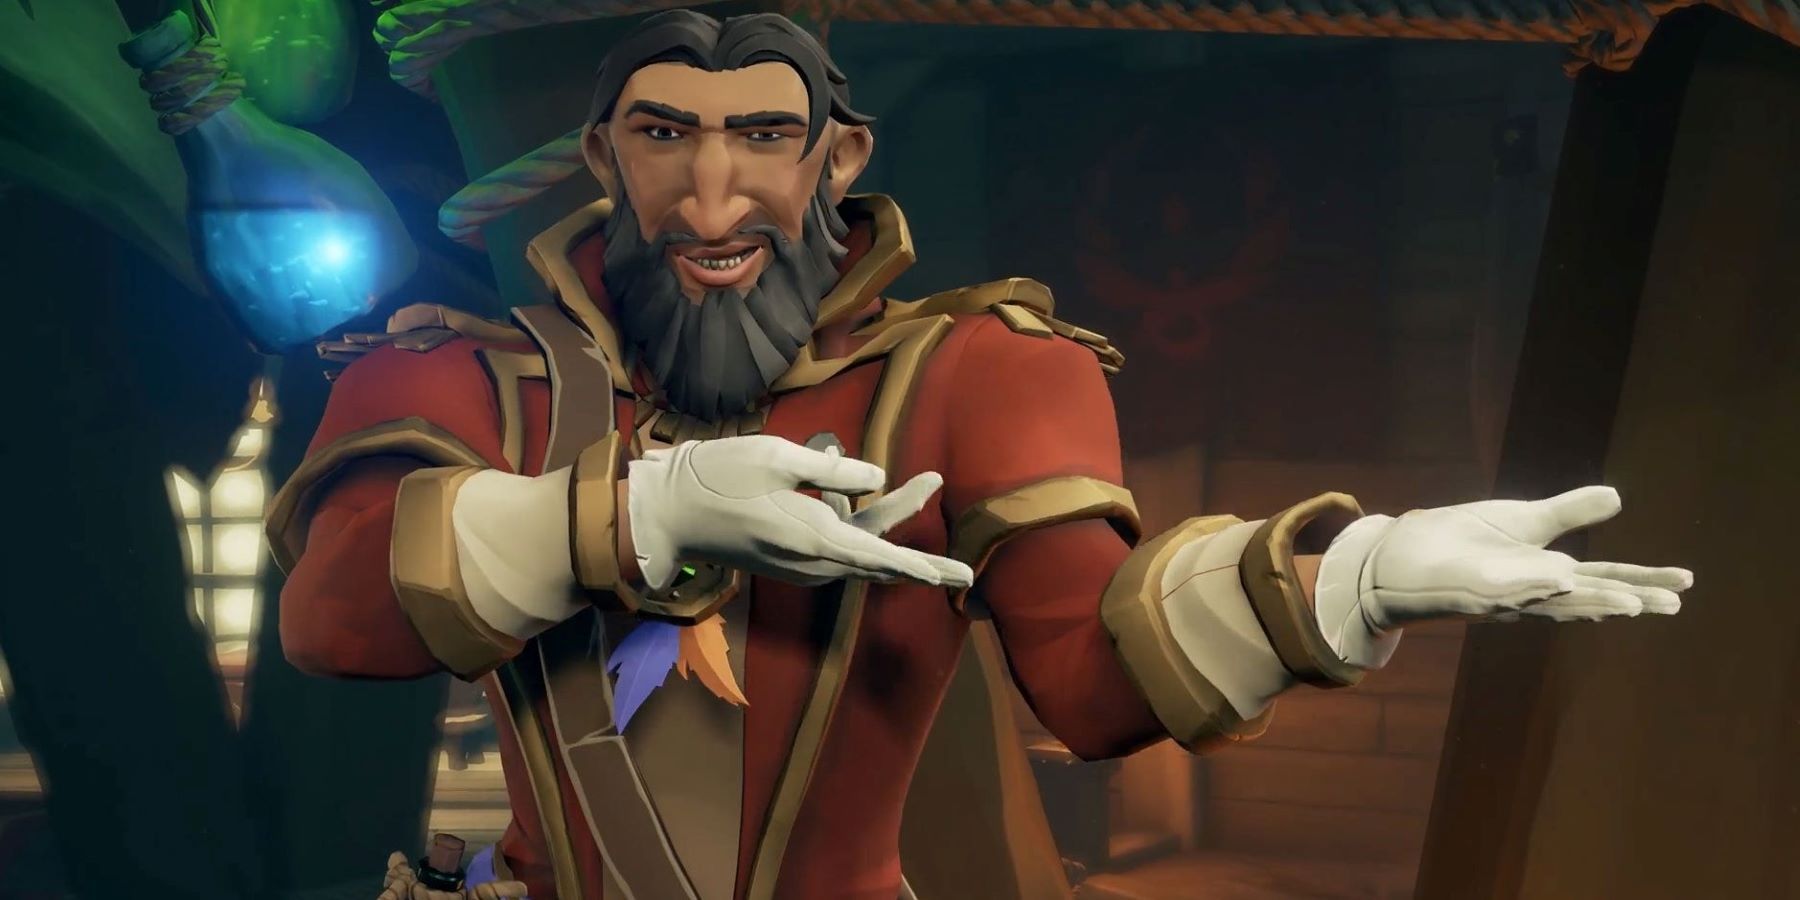 Sea of Thieves Arena host gesturing to one side